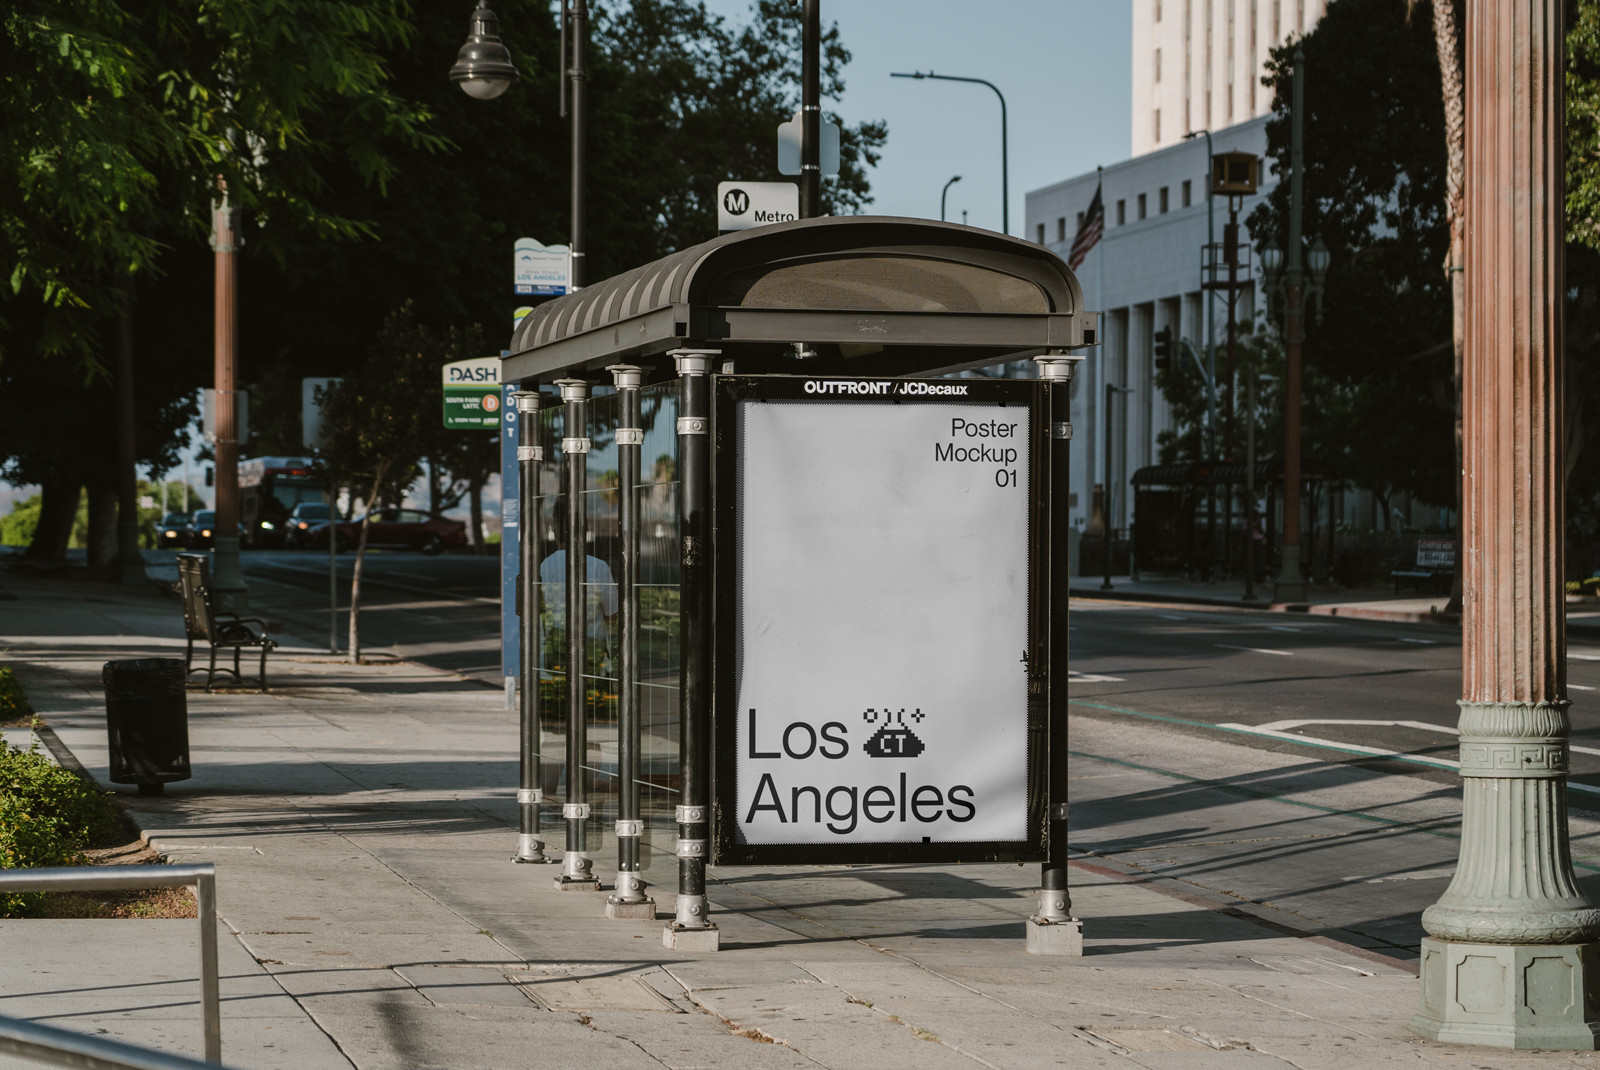 Urban bus stop poster mockup in a street setting, perfect for advertising and design presentations for designers.